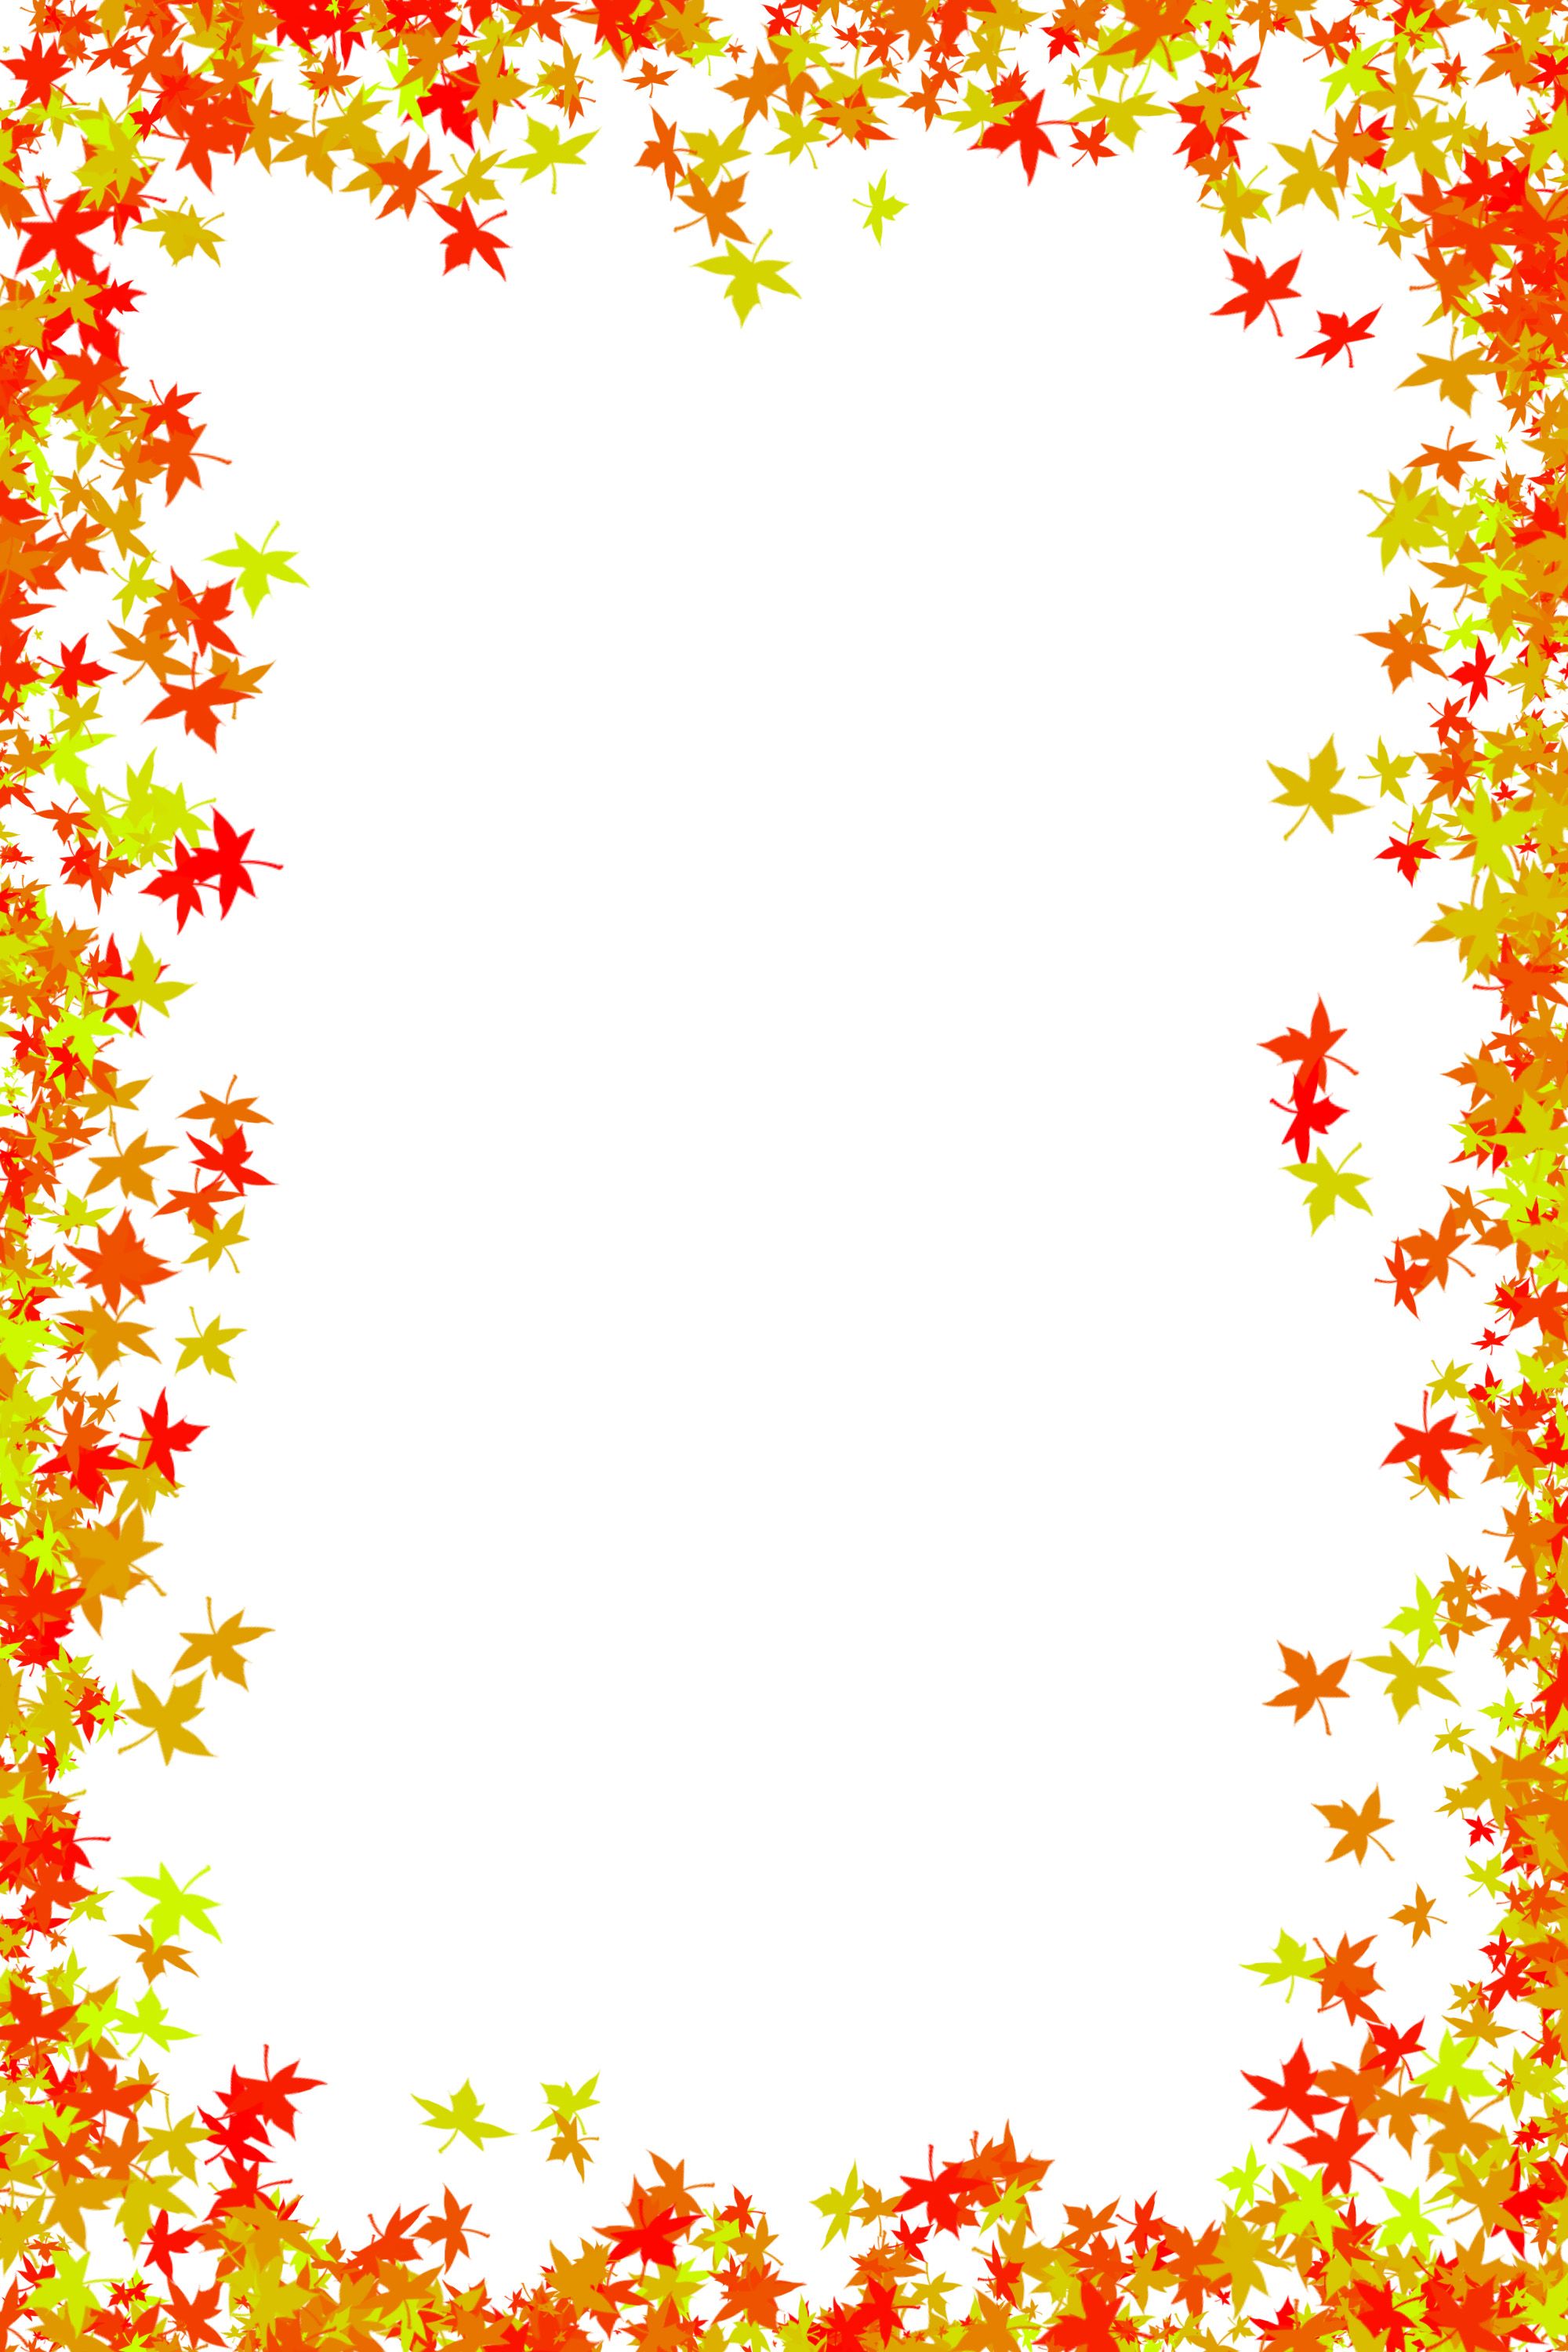 Fall Foliage Border Free. download photo frame of maple leaves in red and orange colors. Clip art borders, Fall borders, Page borders